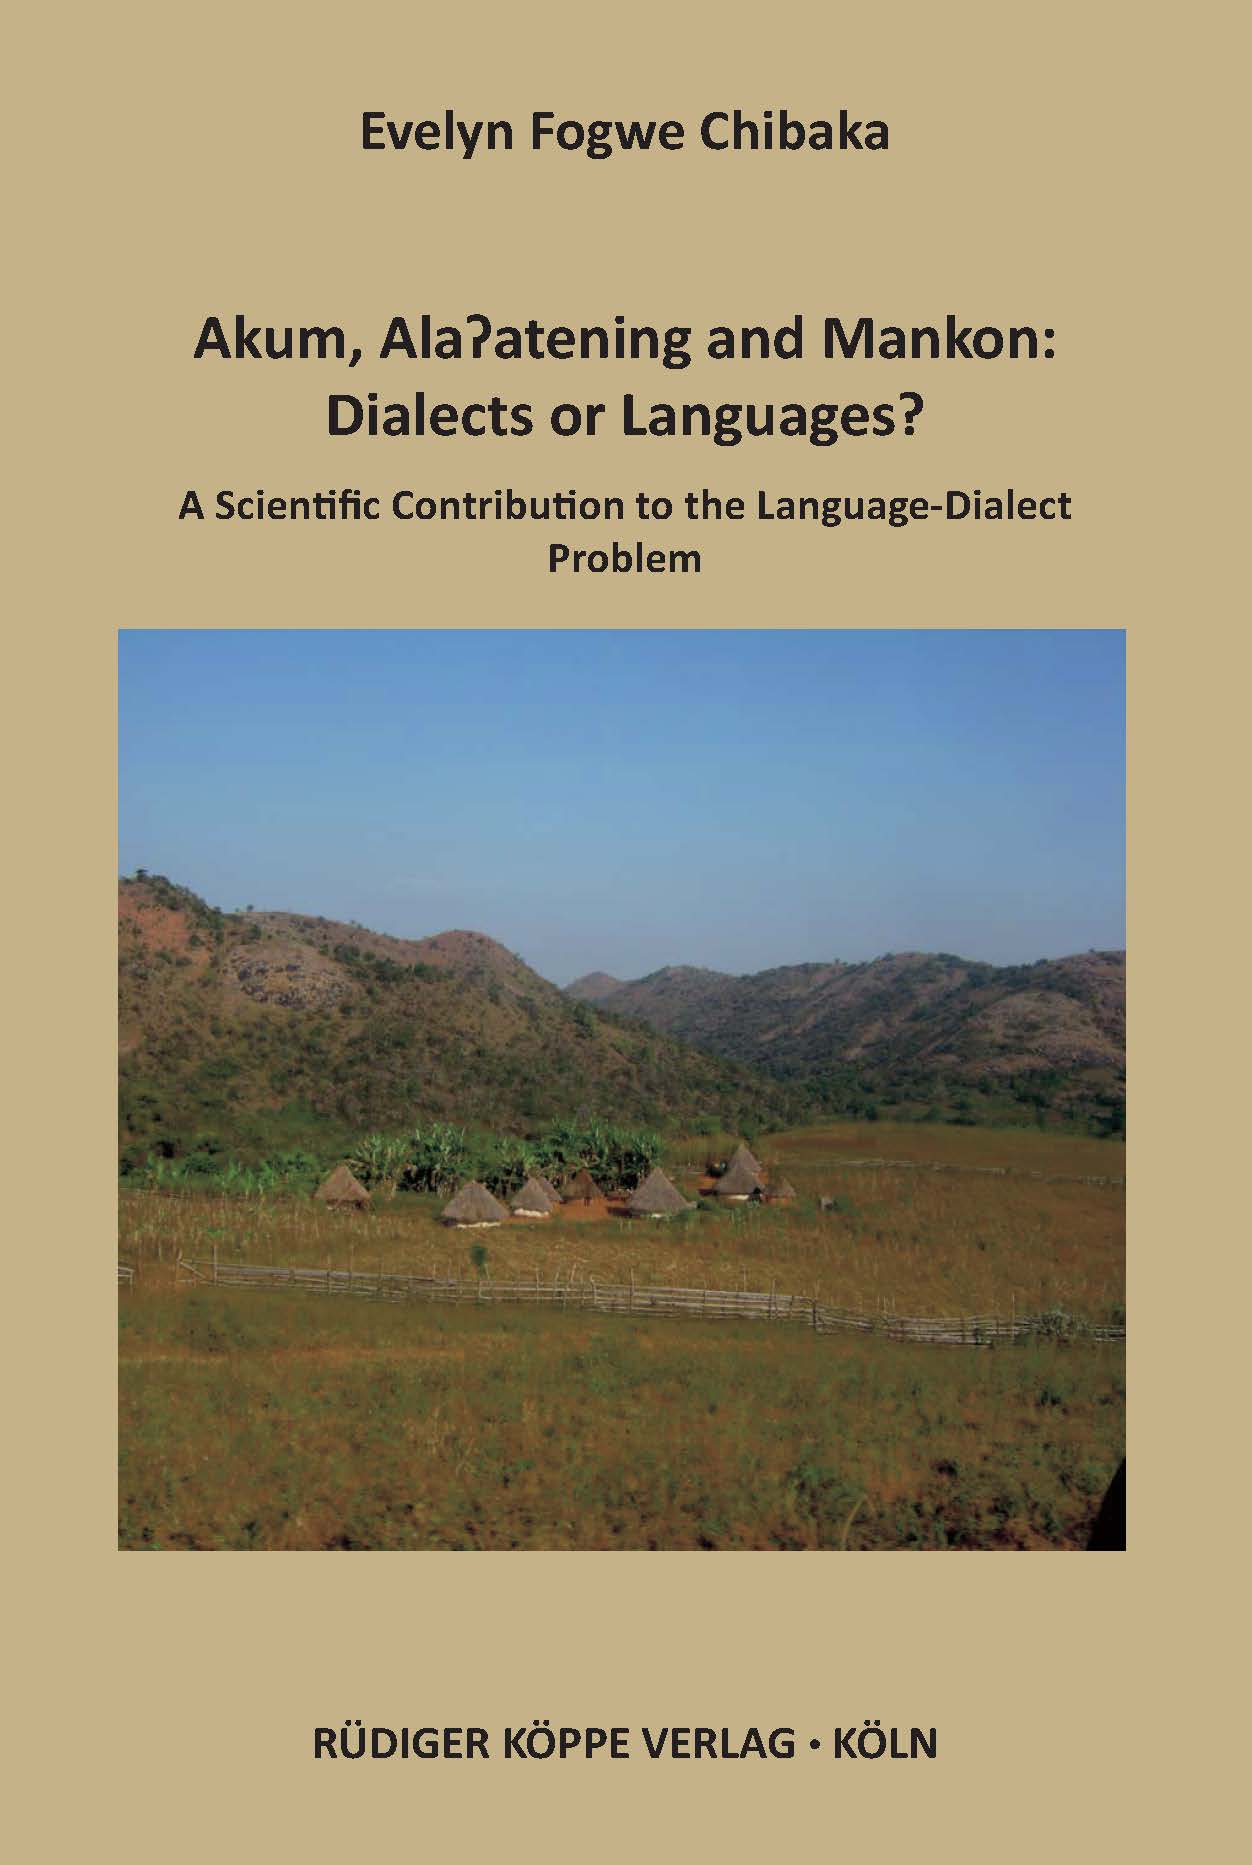 Akum, Ala’atening and Mankon: Dialects or Languages?